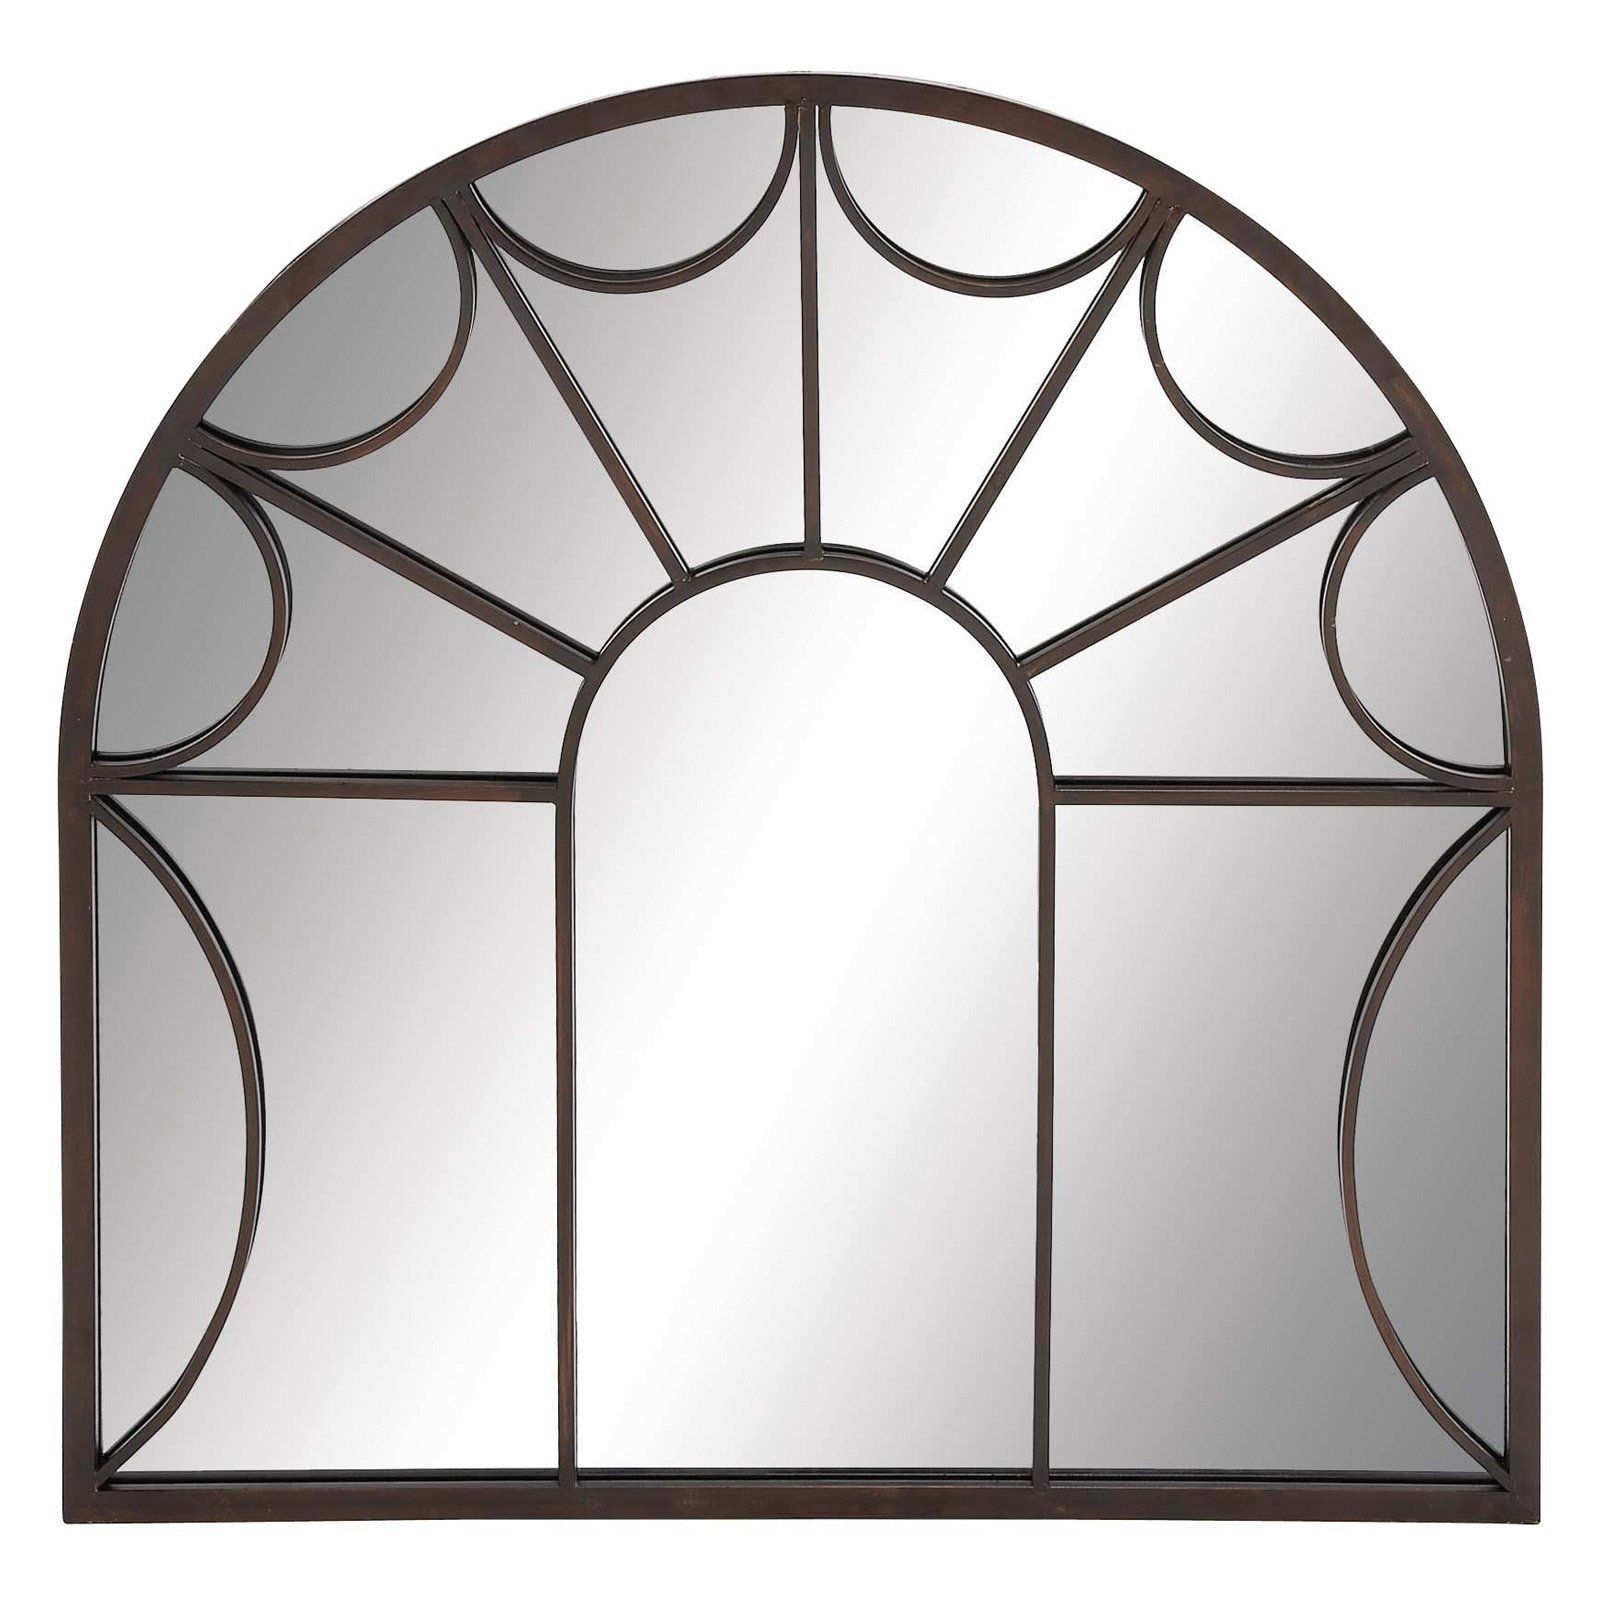 Decmode Traditional Iron Arched Wall Mirror | Mirror Wall, Traditional With Metal Arch Window Wall Mirrors (View 2 of 15)